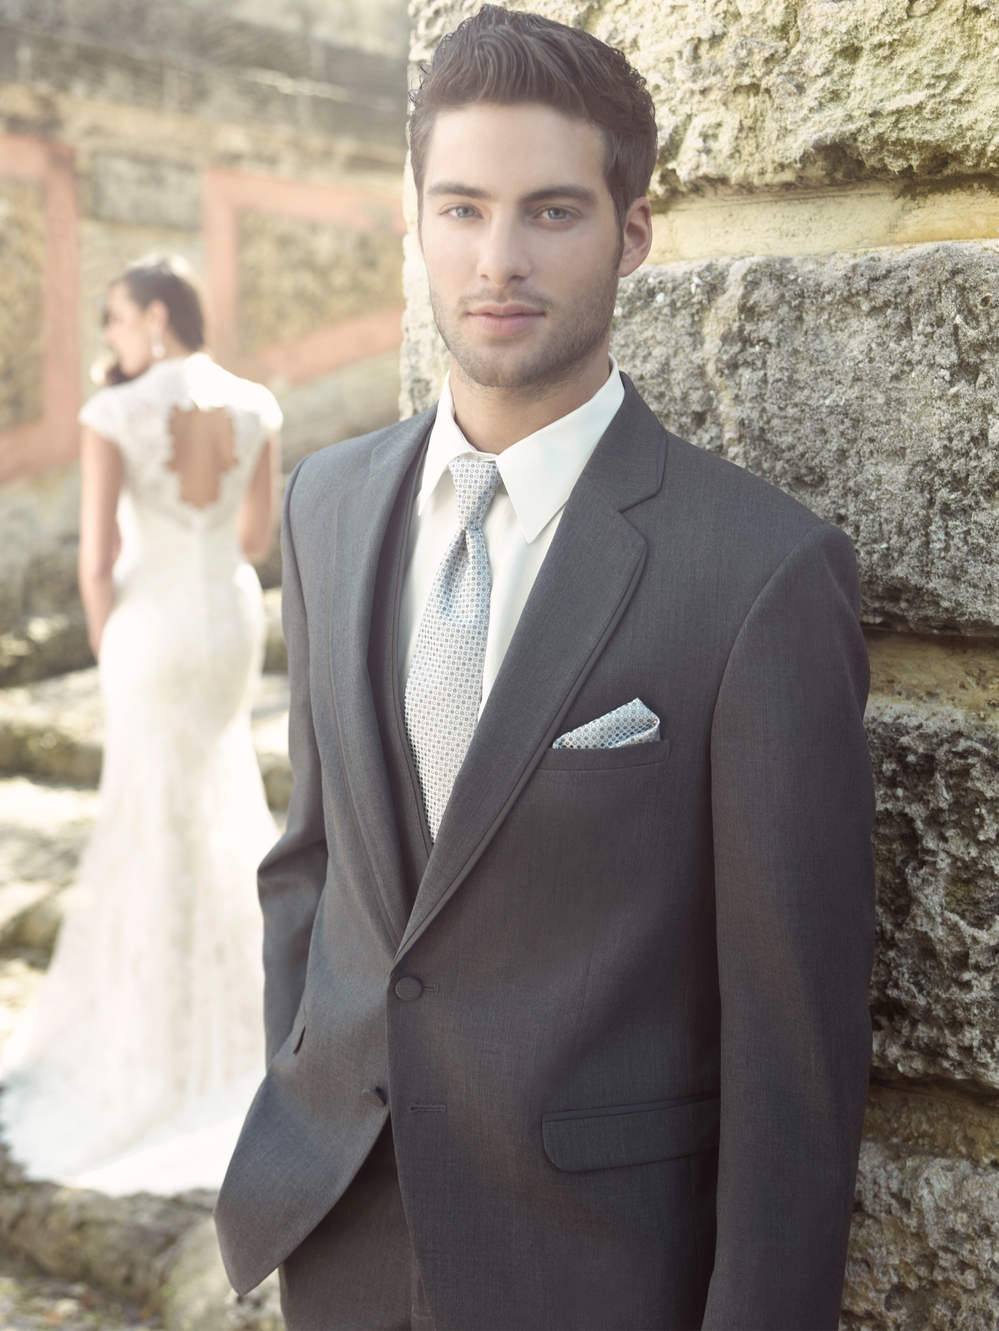 2013 New Fashion wedding suit 100% woollen /Gray Groom tuxedos/Free shipping